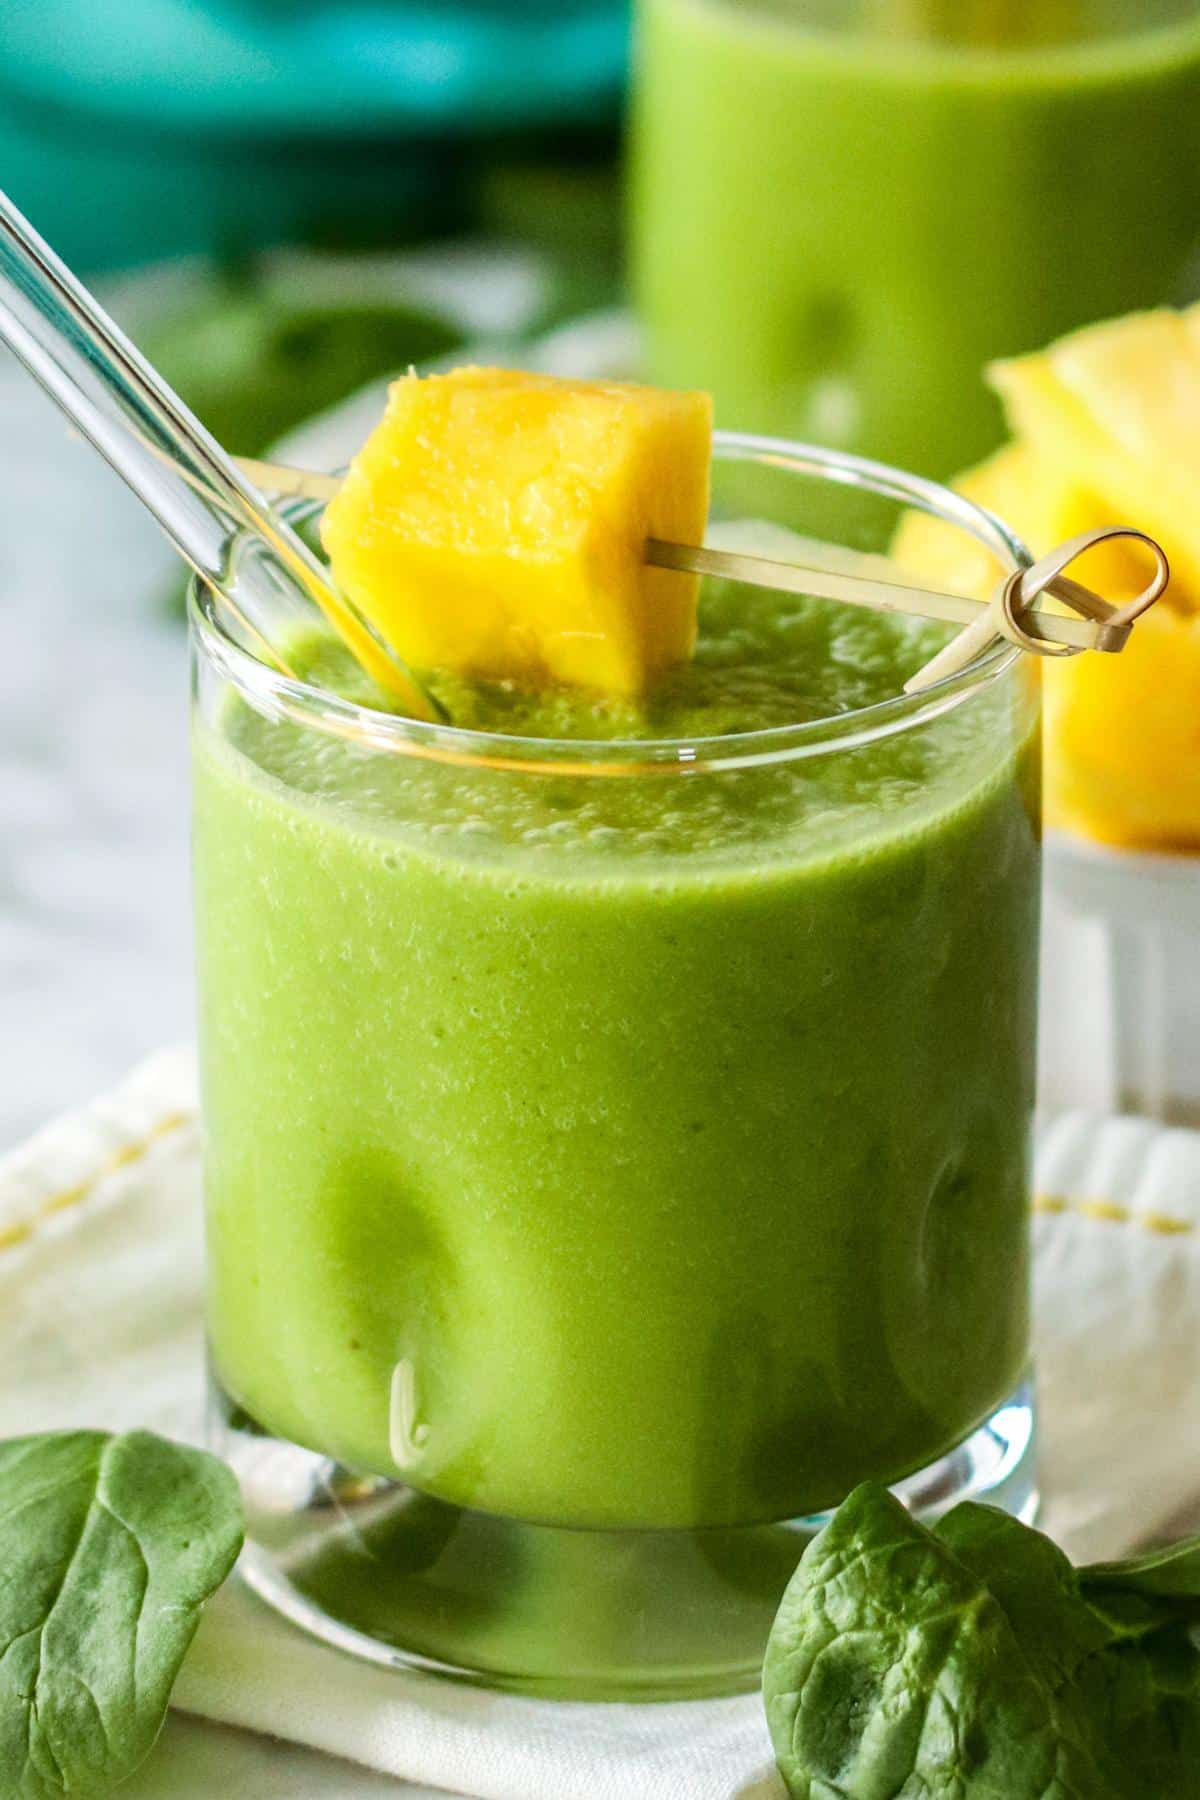 Green smoothie with pineapple garnish.